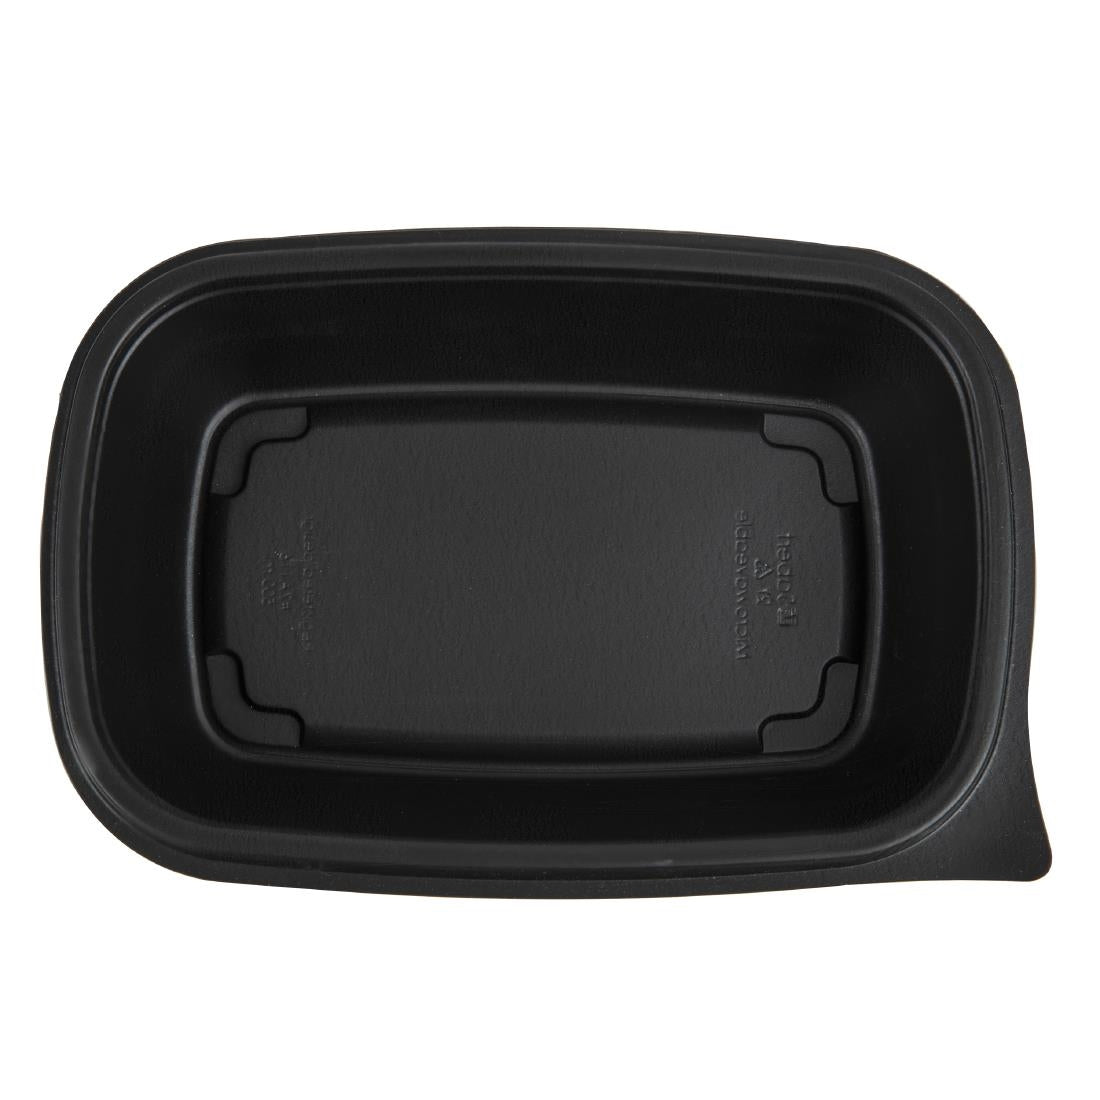 Fastpac Small Rectangular Food Containers 500ml / 17oz JD Catering Equipment Solutions Ltd